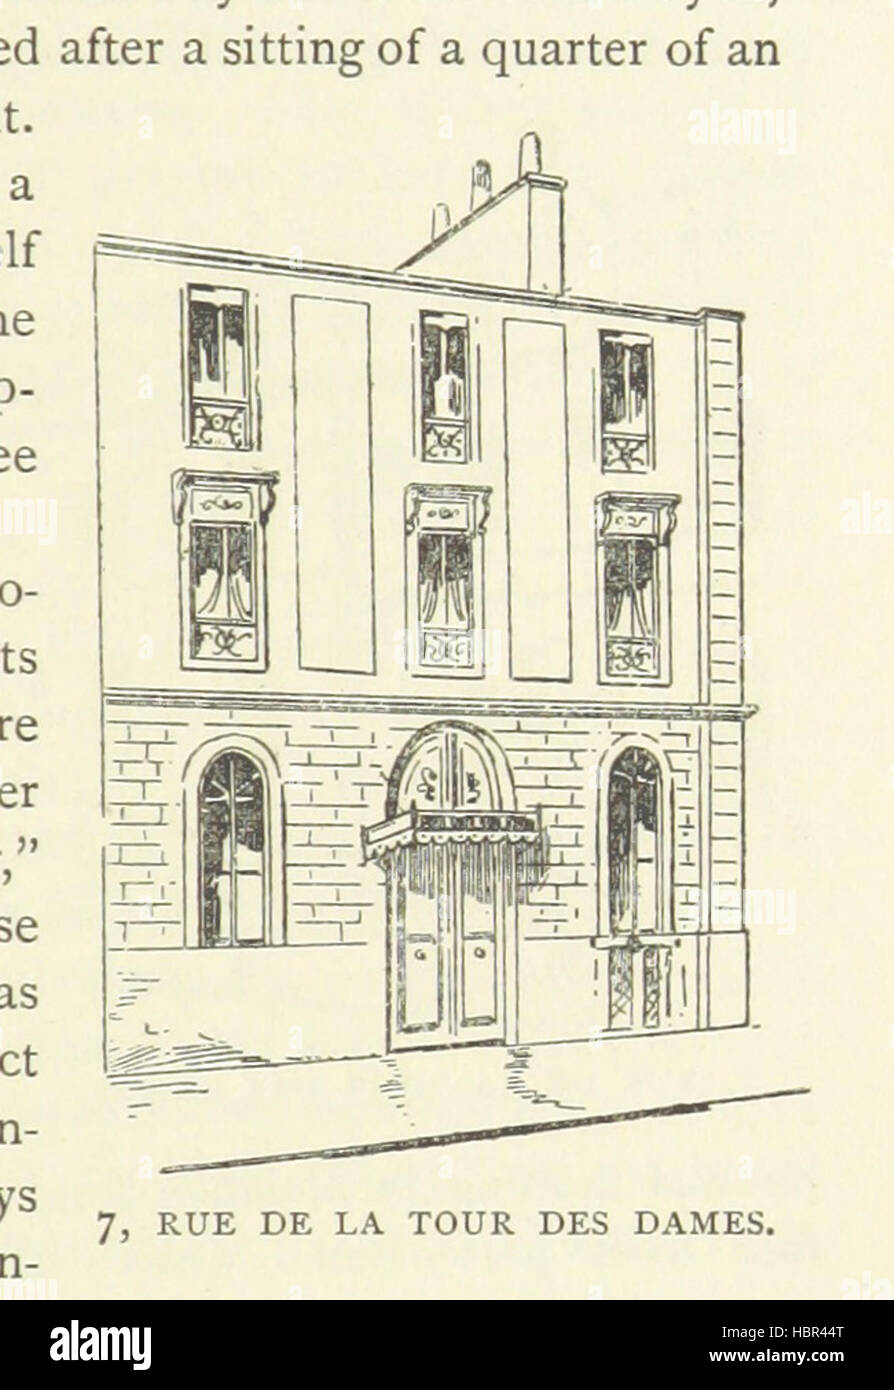 Image taken from page 81 of 'Memorable Paris Houses ... With ... illustrations ... by Paris artists' Image taken from page 81 of 'Memorable Paris Houses Stock Photo